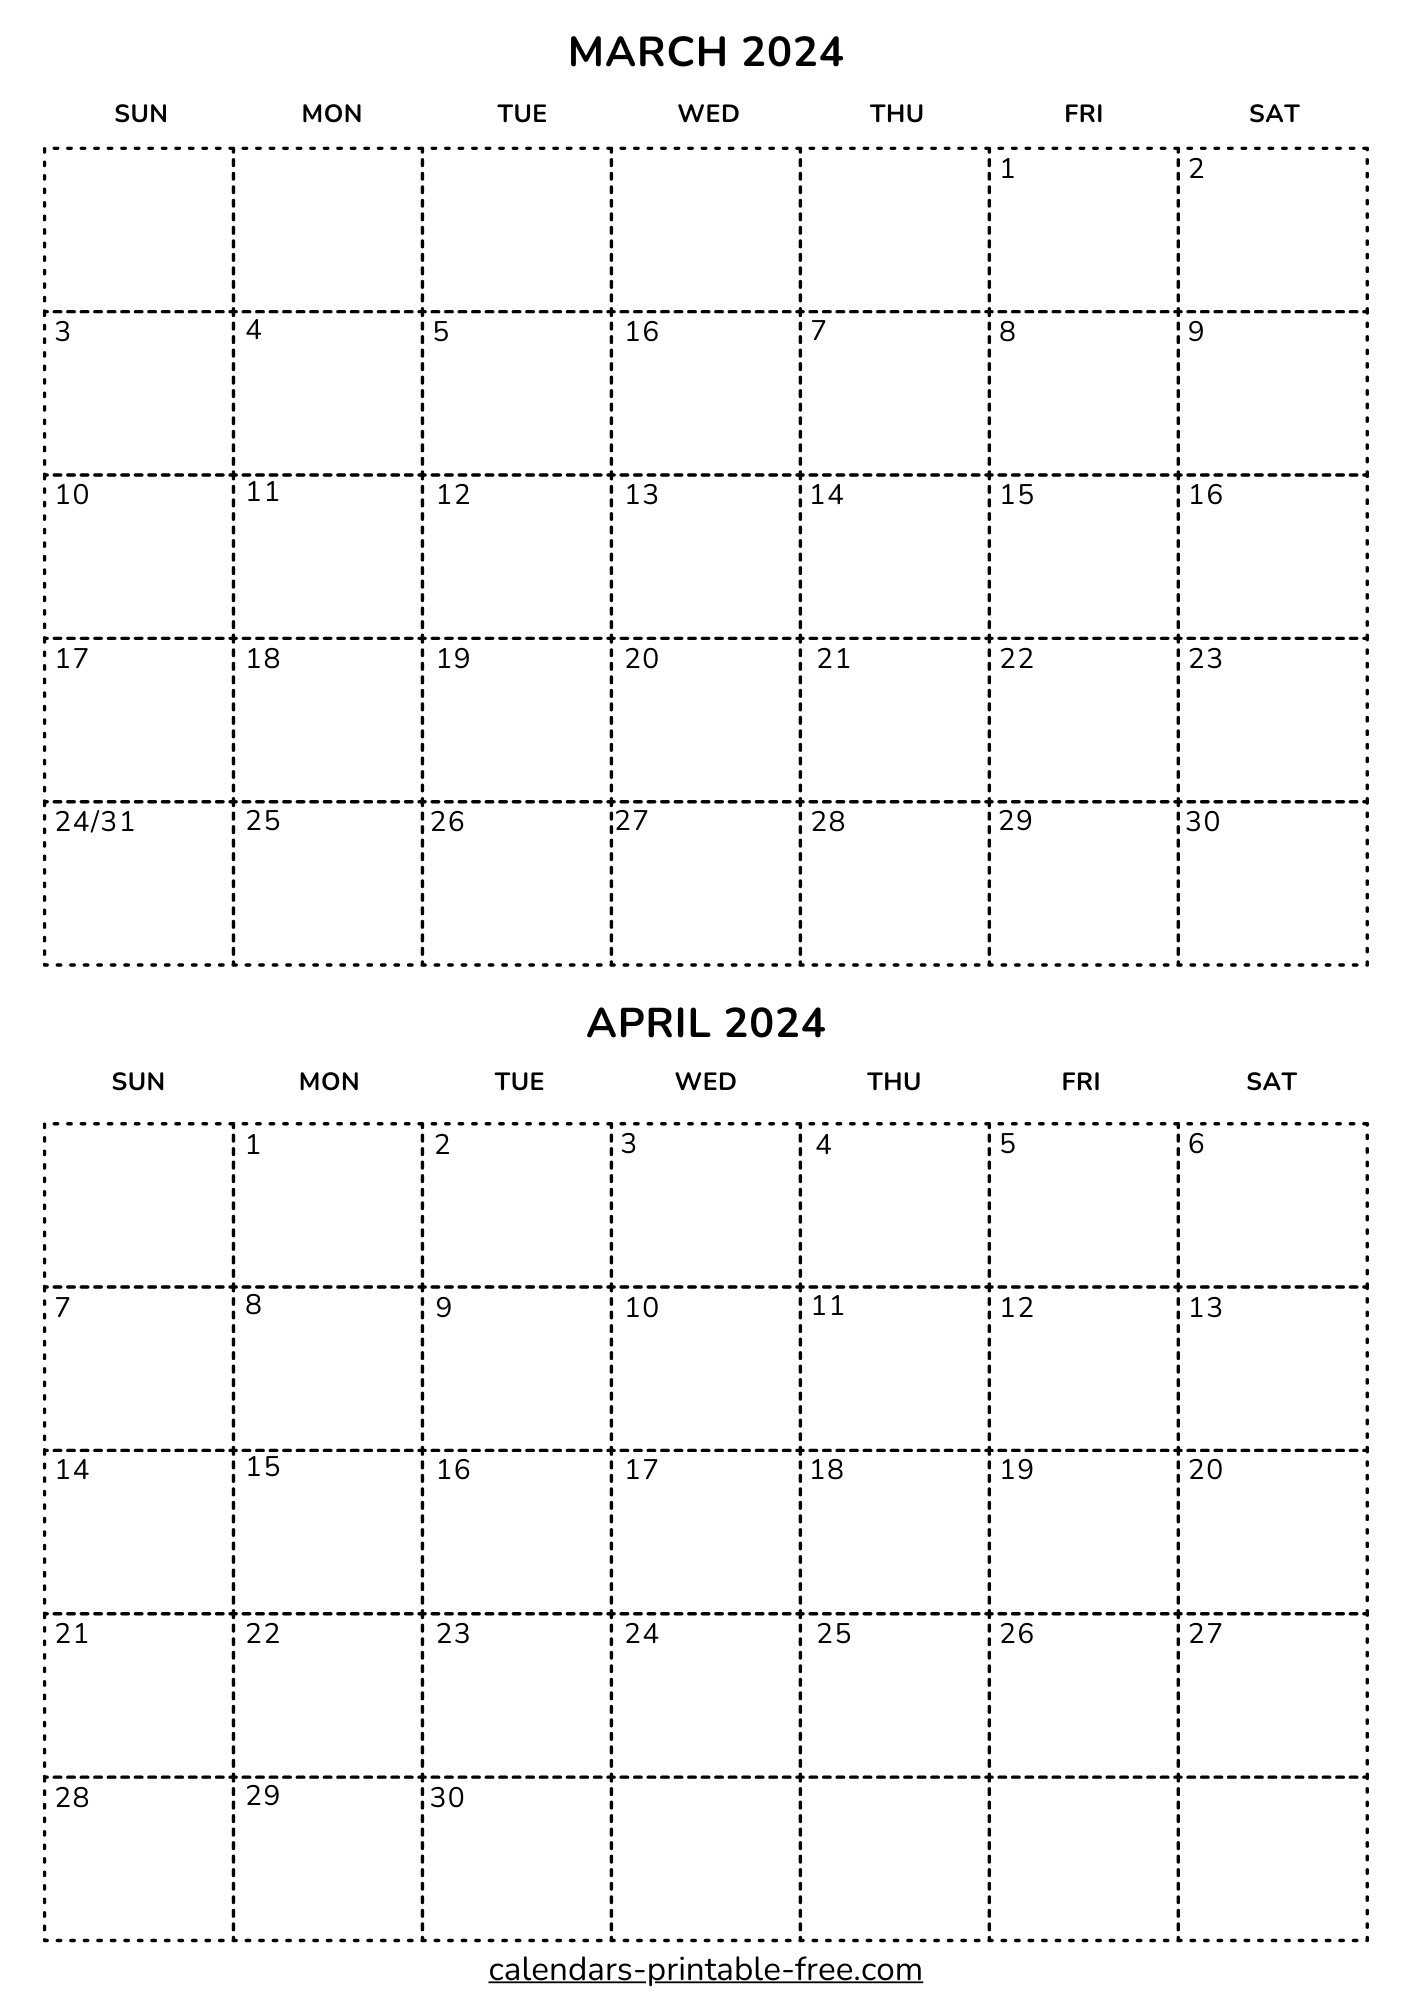 March and April 2024 Calendar Printable Free